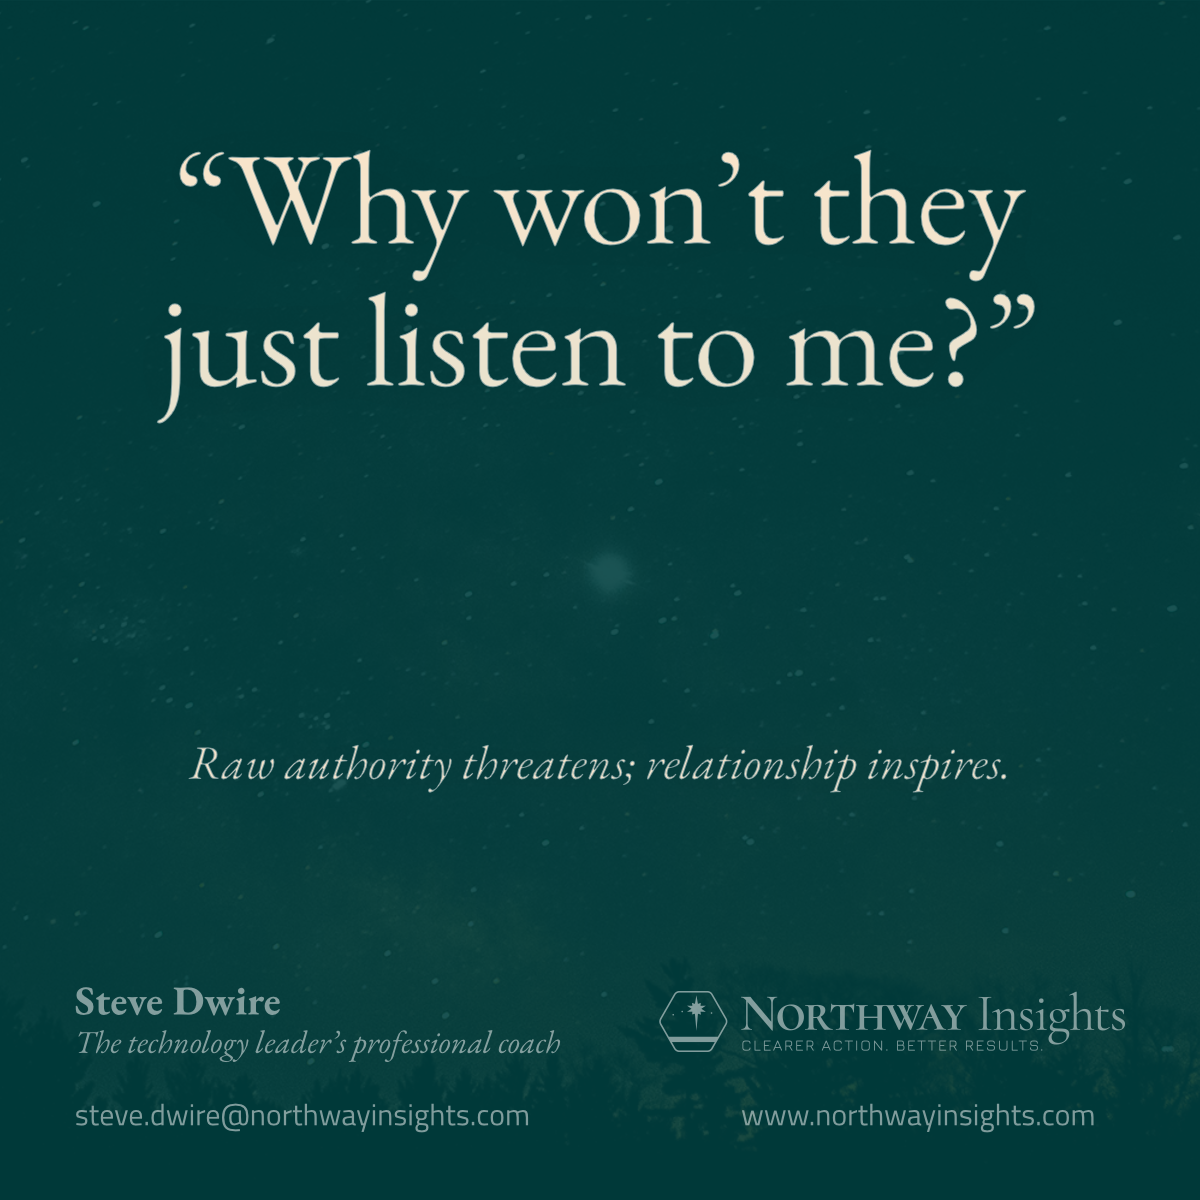 "Why won't they just listen to me?" (Raw authority threatens; relationship inspires.)